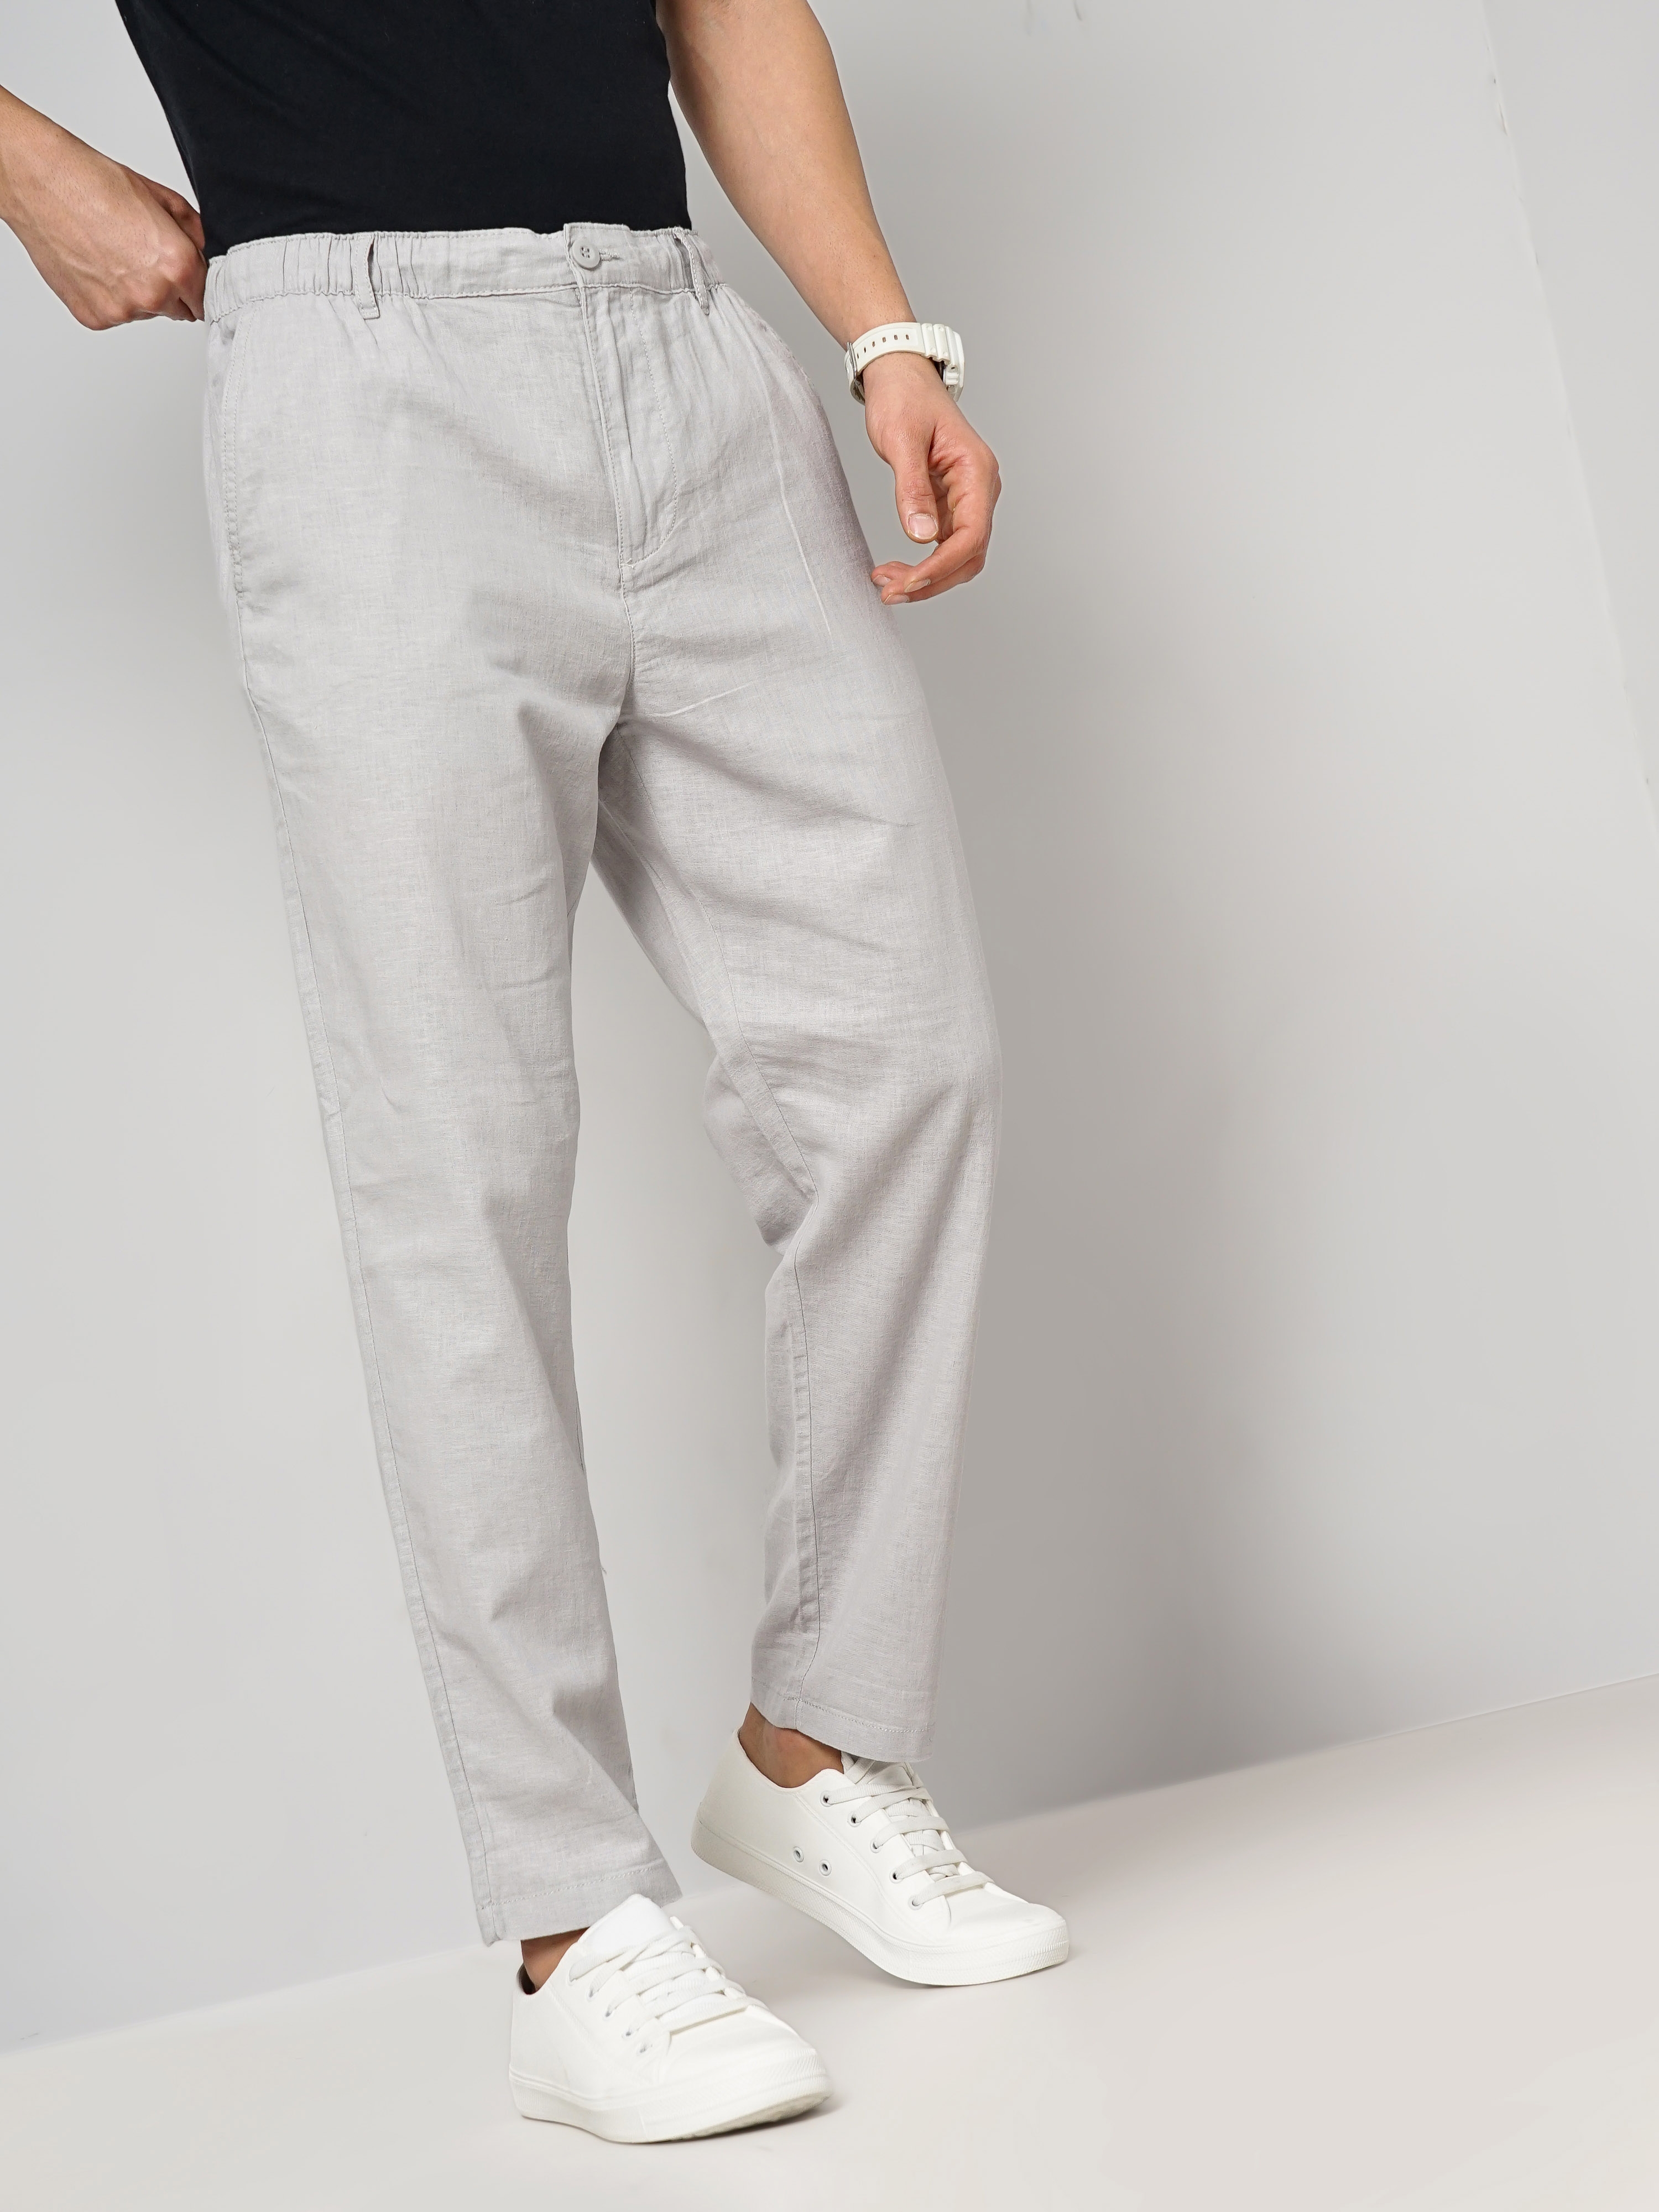 Linen Trousers | Buy Linen Trousers Online in India at Best Price